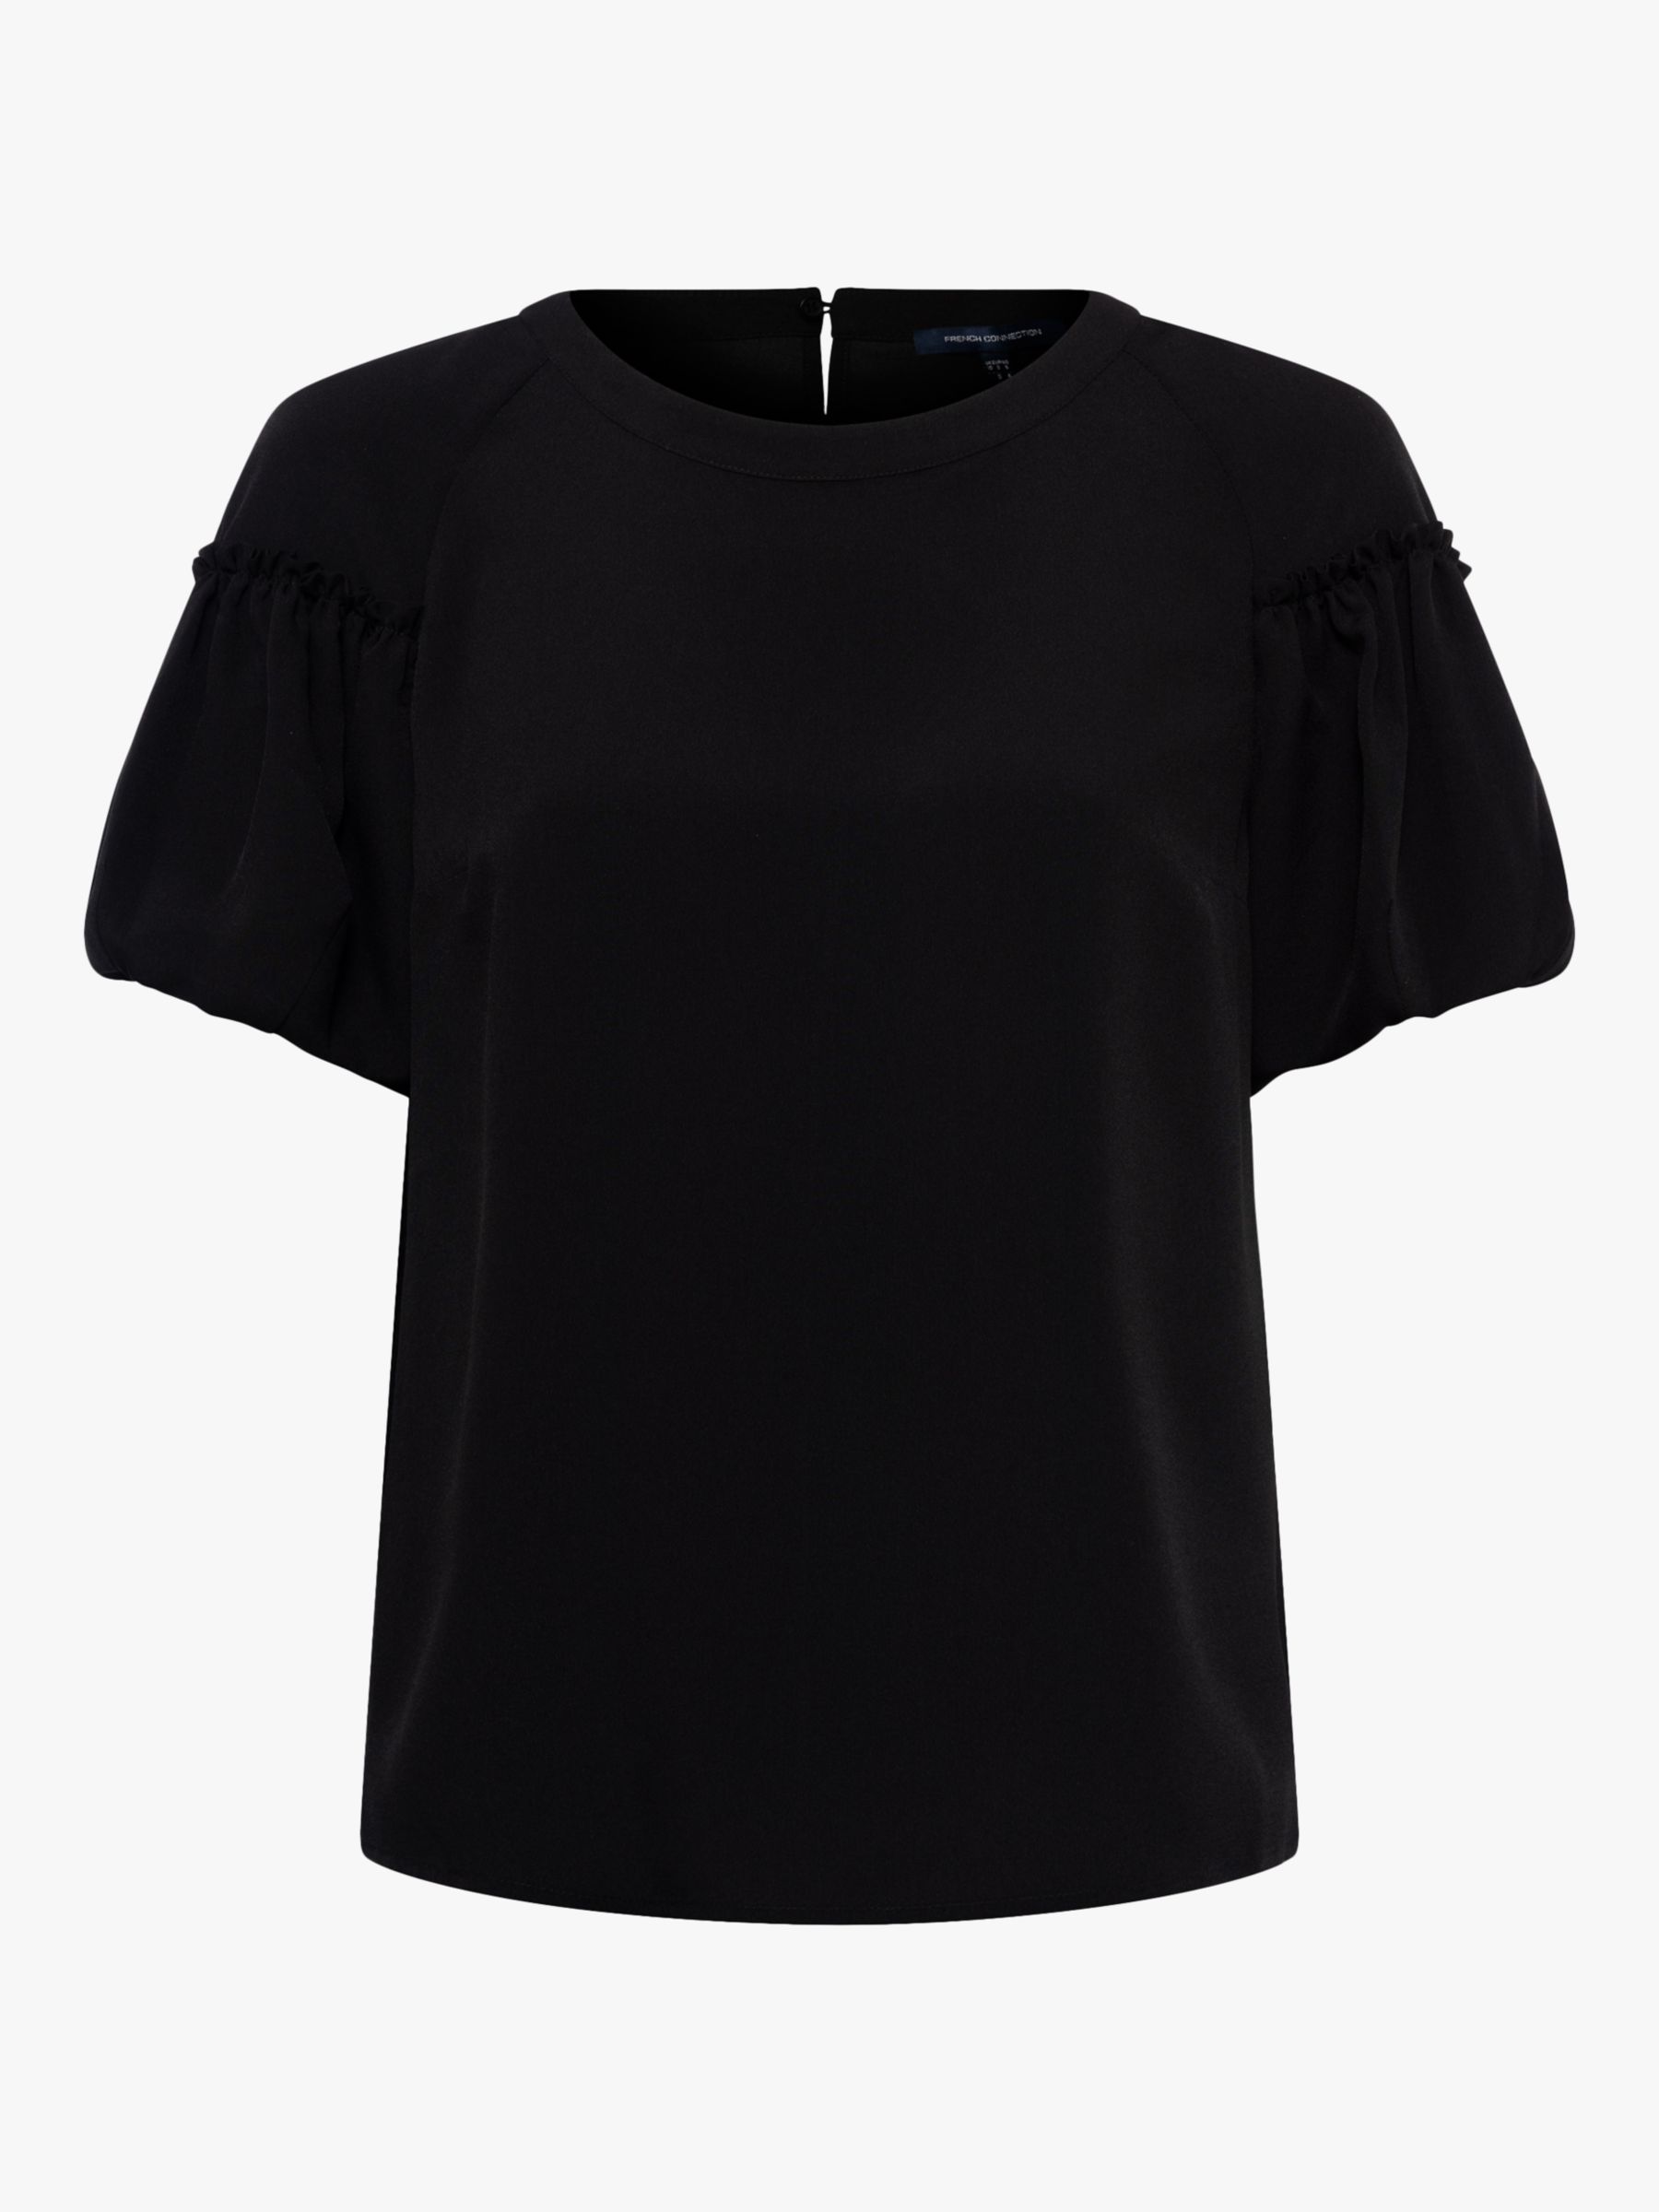 French Connection Light Crepe Top, Black at John Lewis & Partners